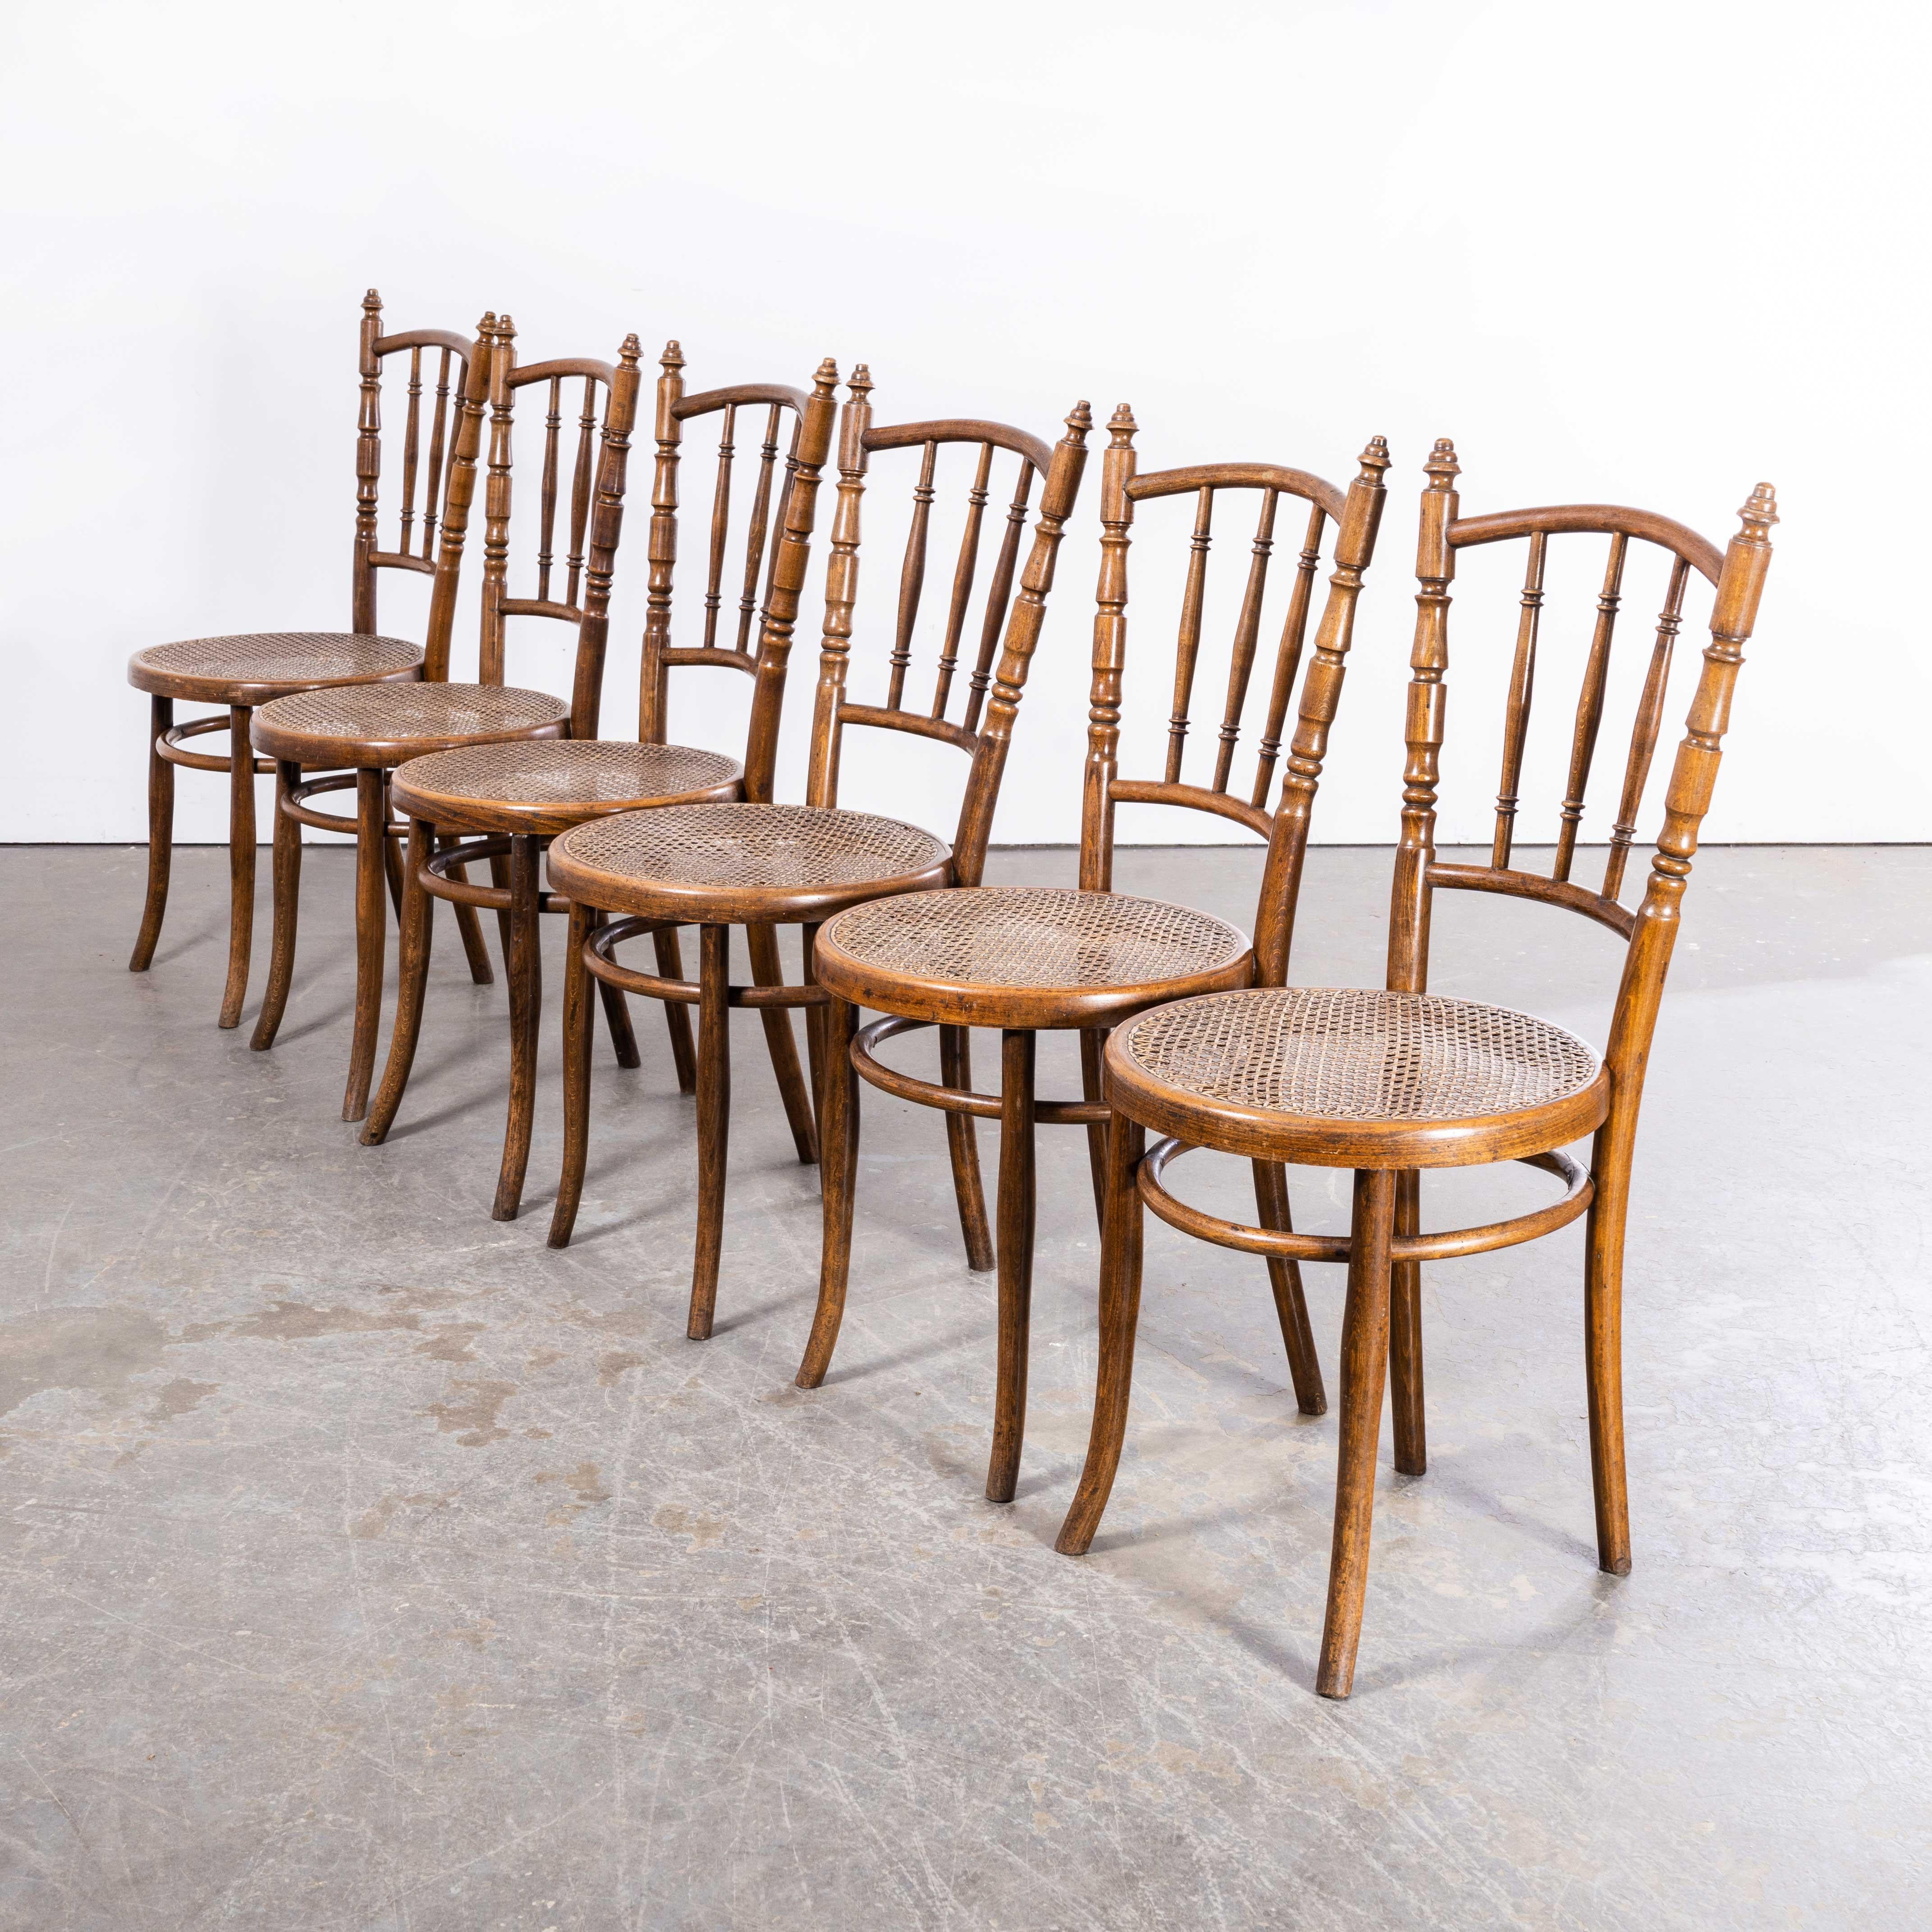 1950s Cane Seated Hofmann Bentwood Dining Chairs – Set Of Six. 3